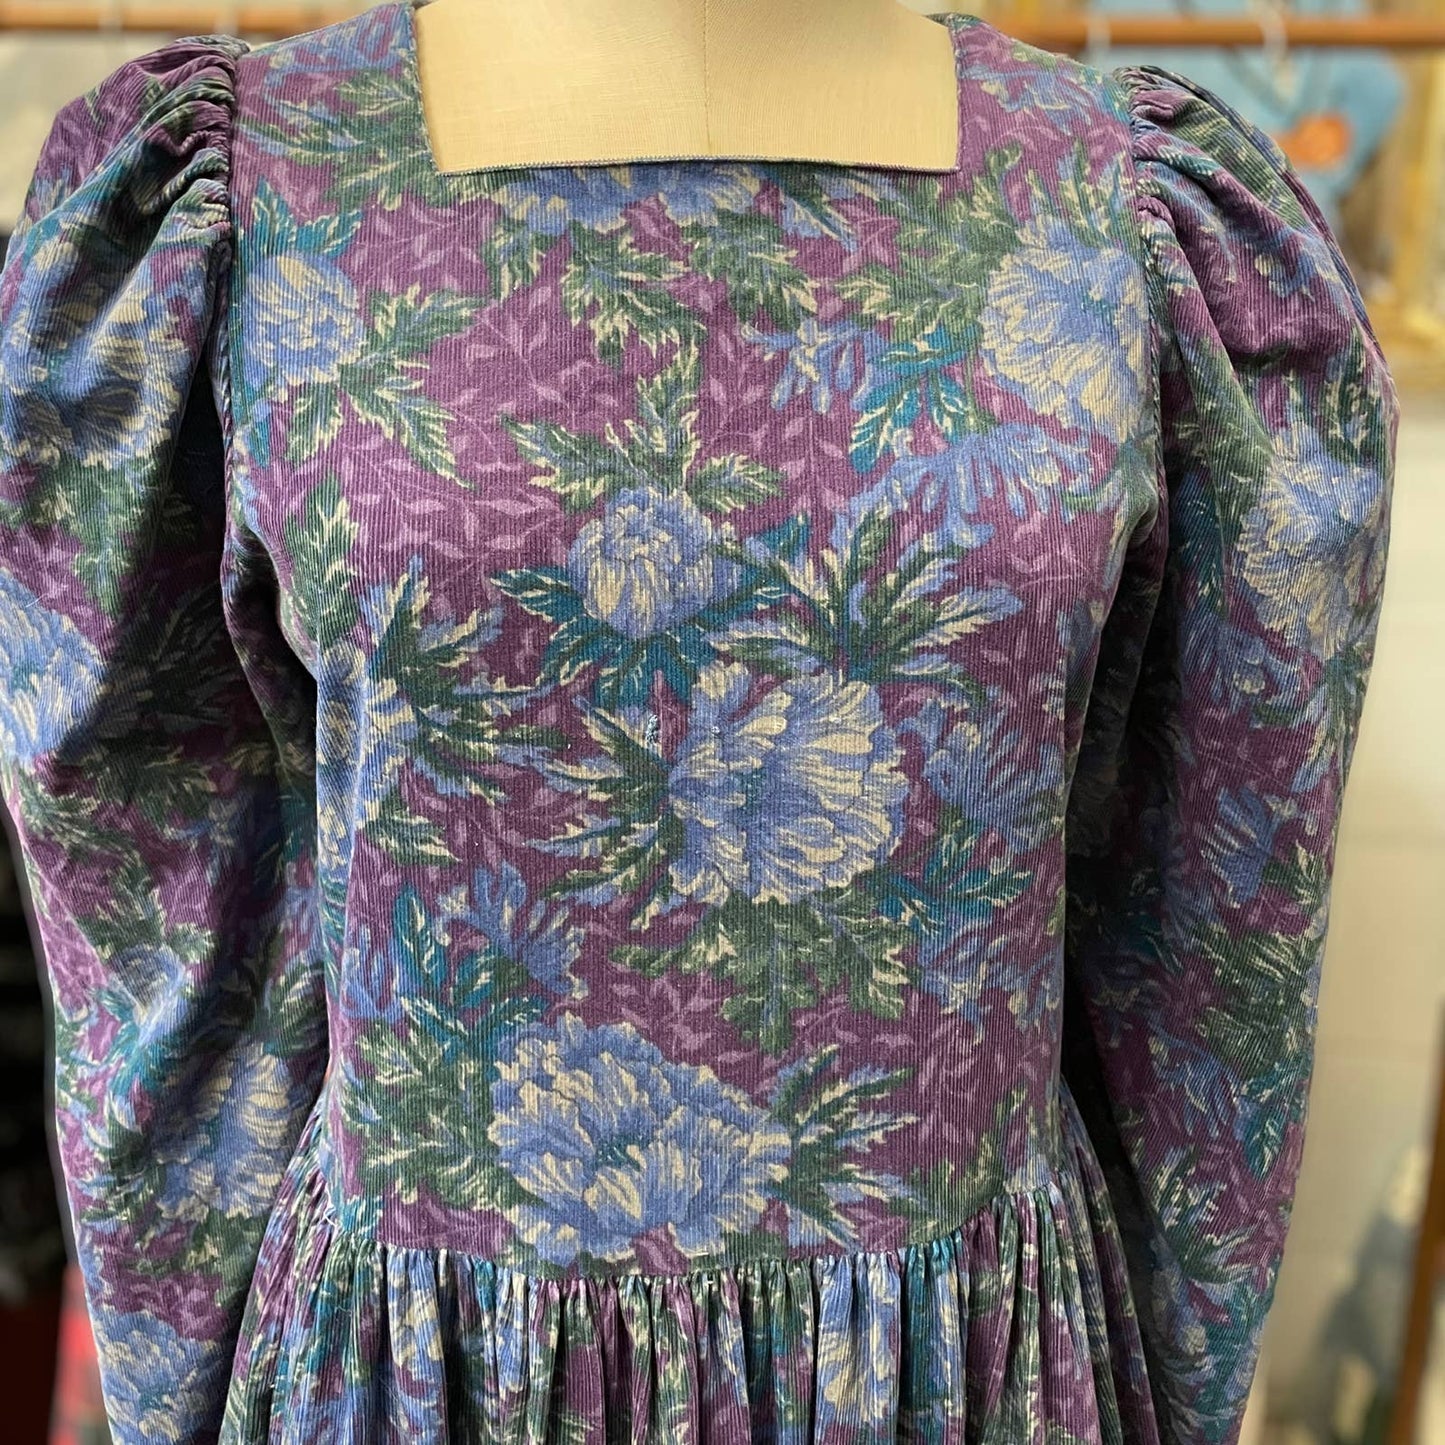 Laura Ashley 80's floral garden corduroy puff sleeve dress / size small